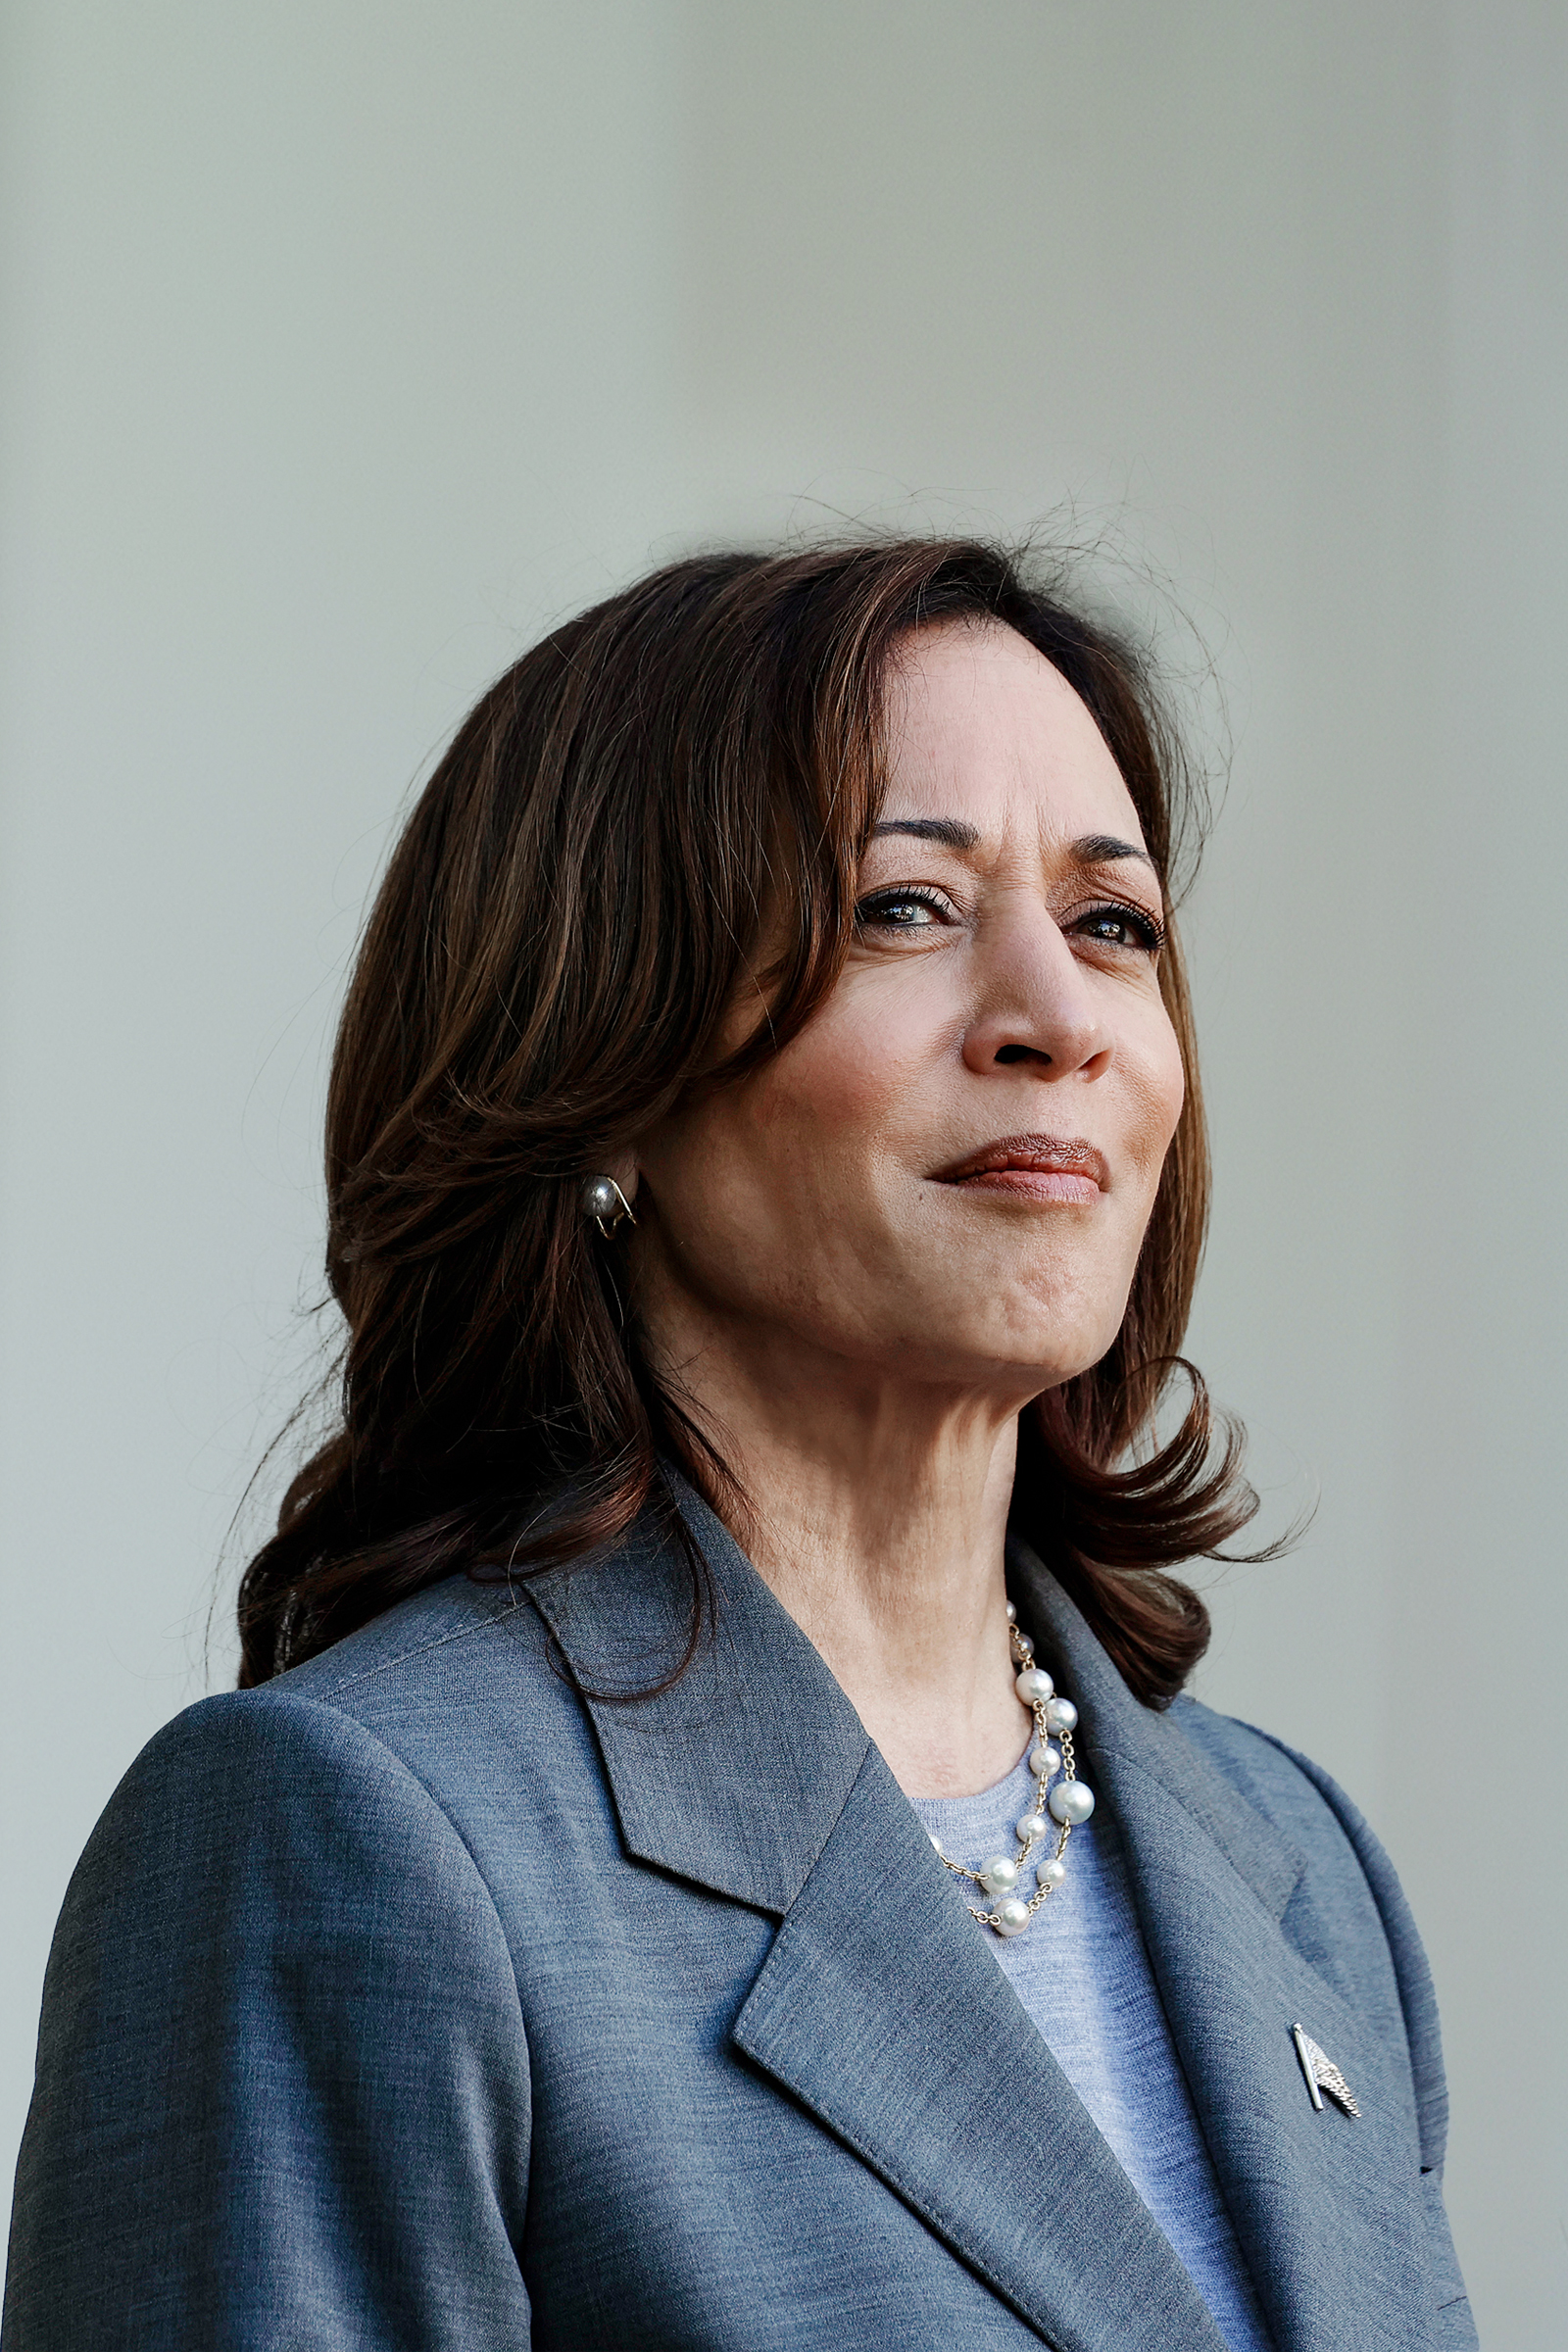 30 Things to Know About Kamala Harris, New Democrat Frontrunner